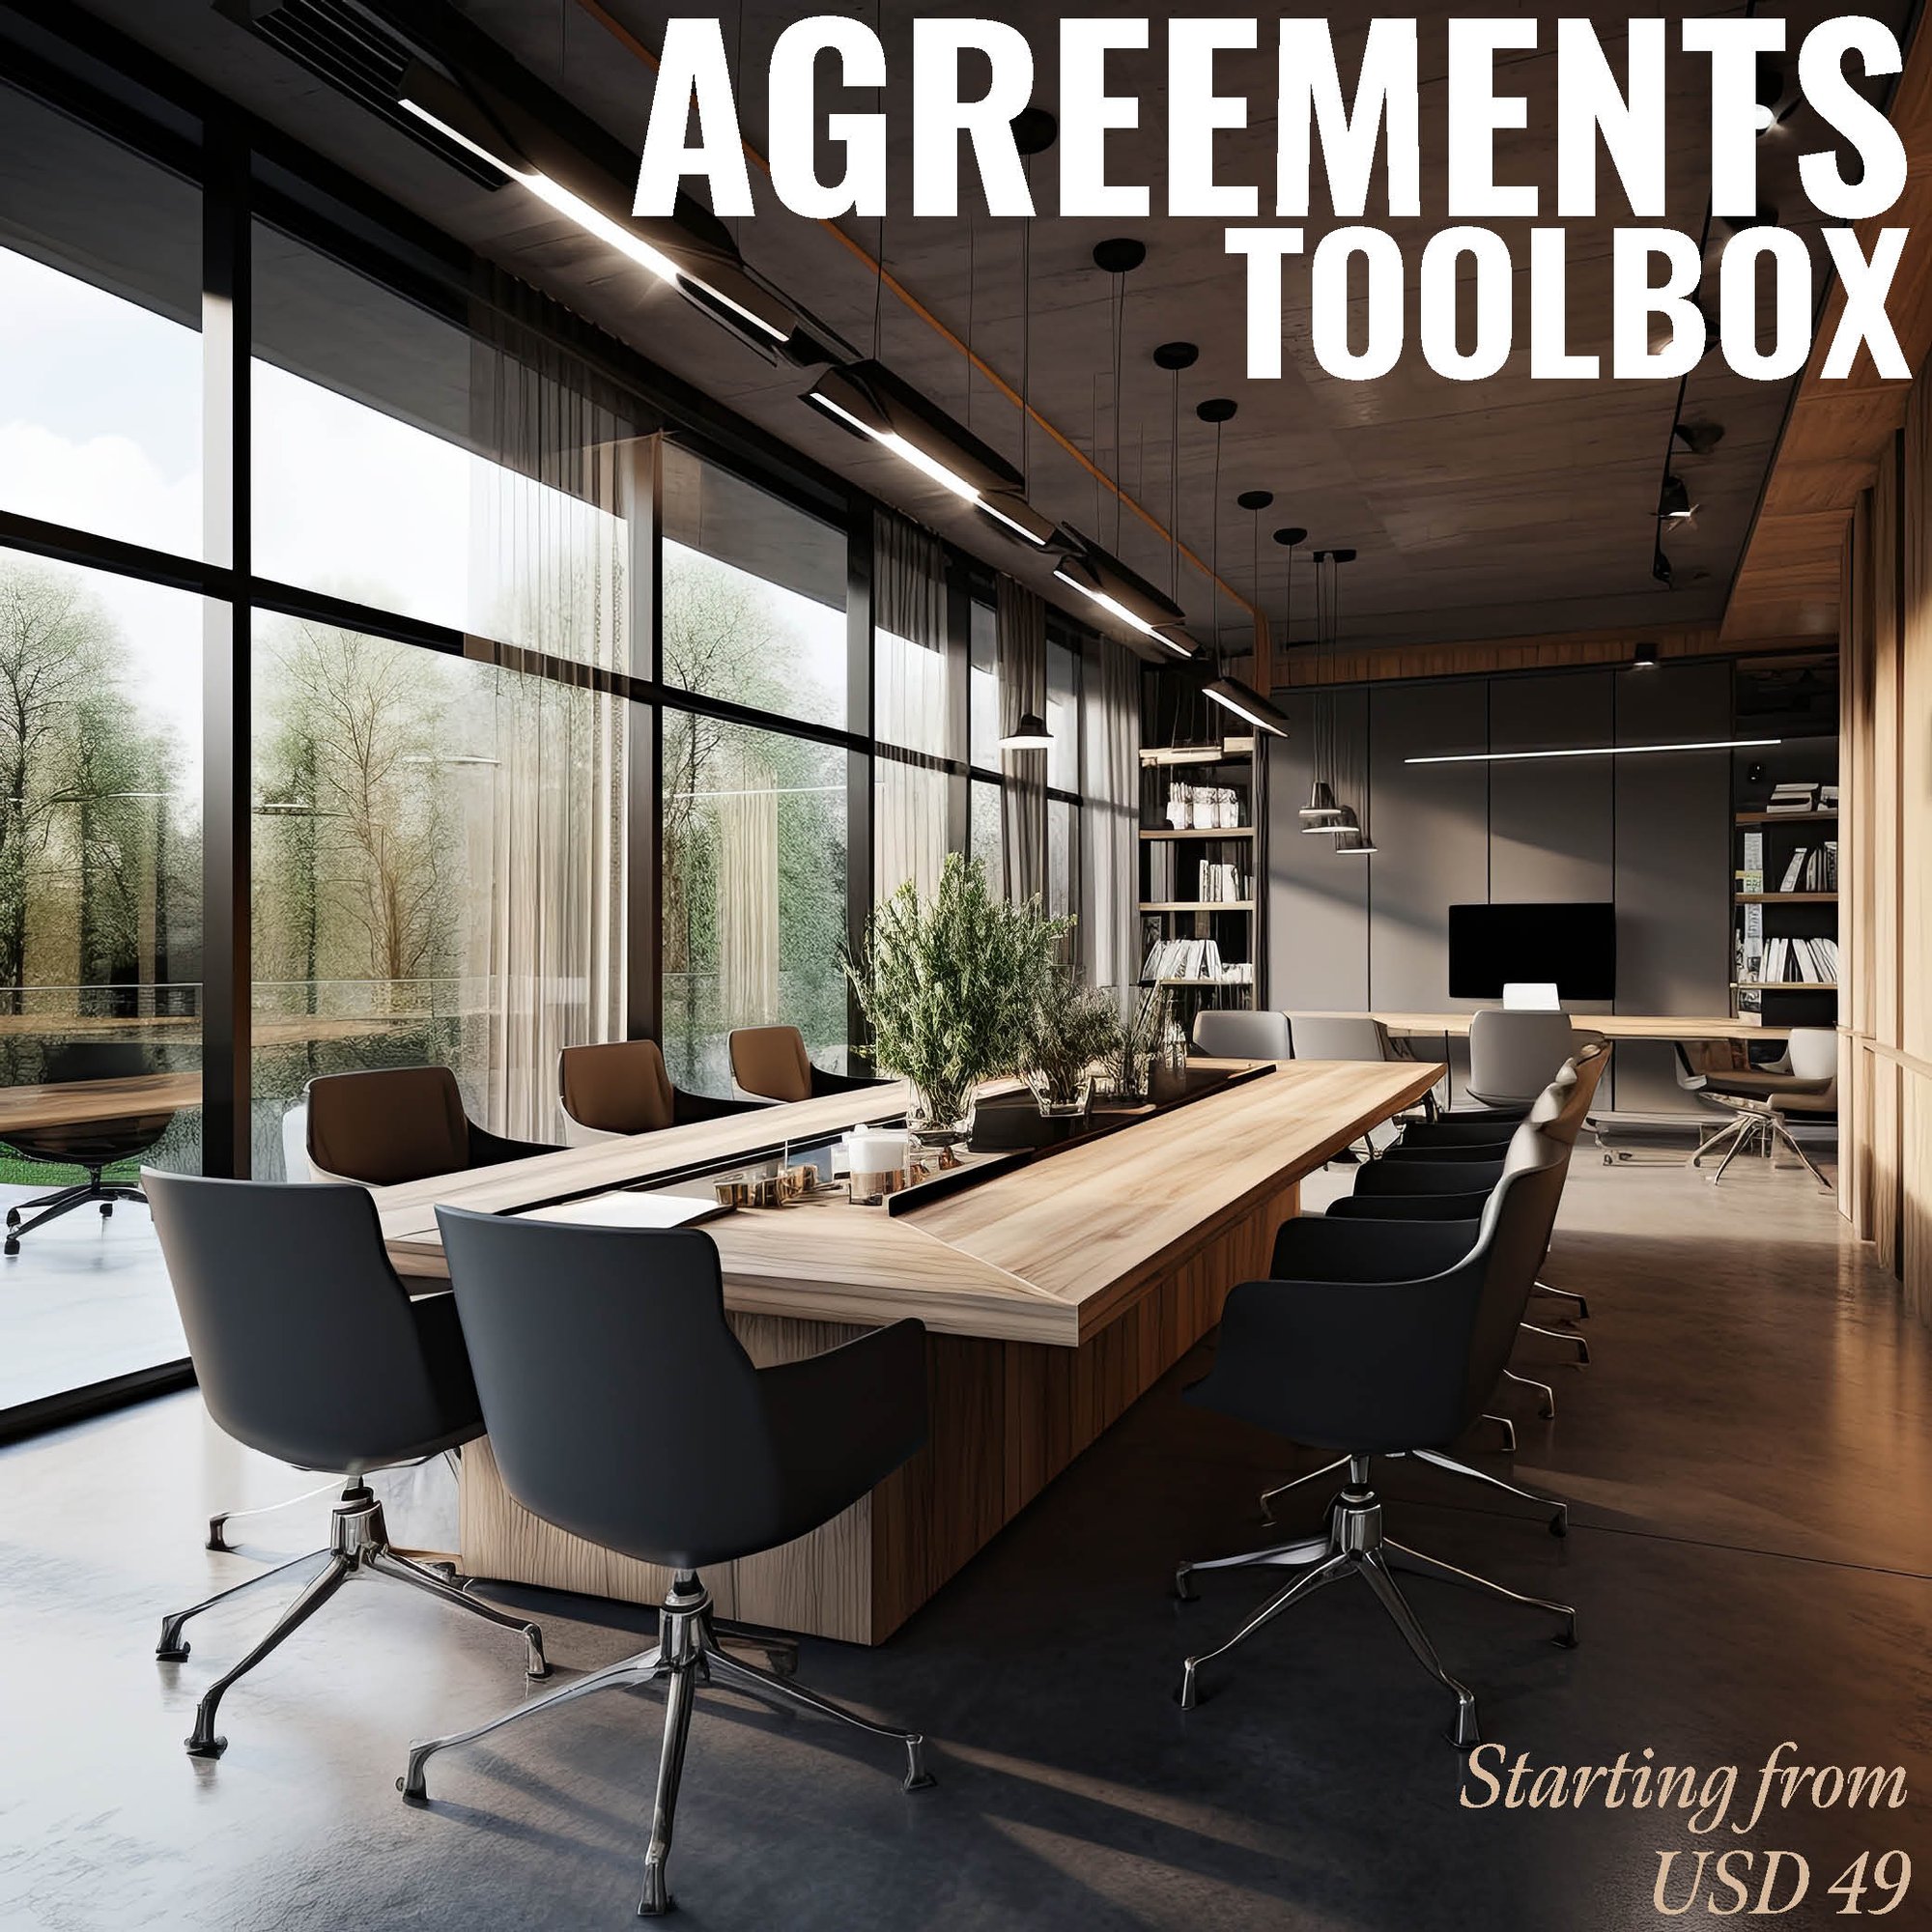 Agreements ToolBox Side Image